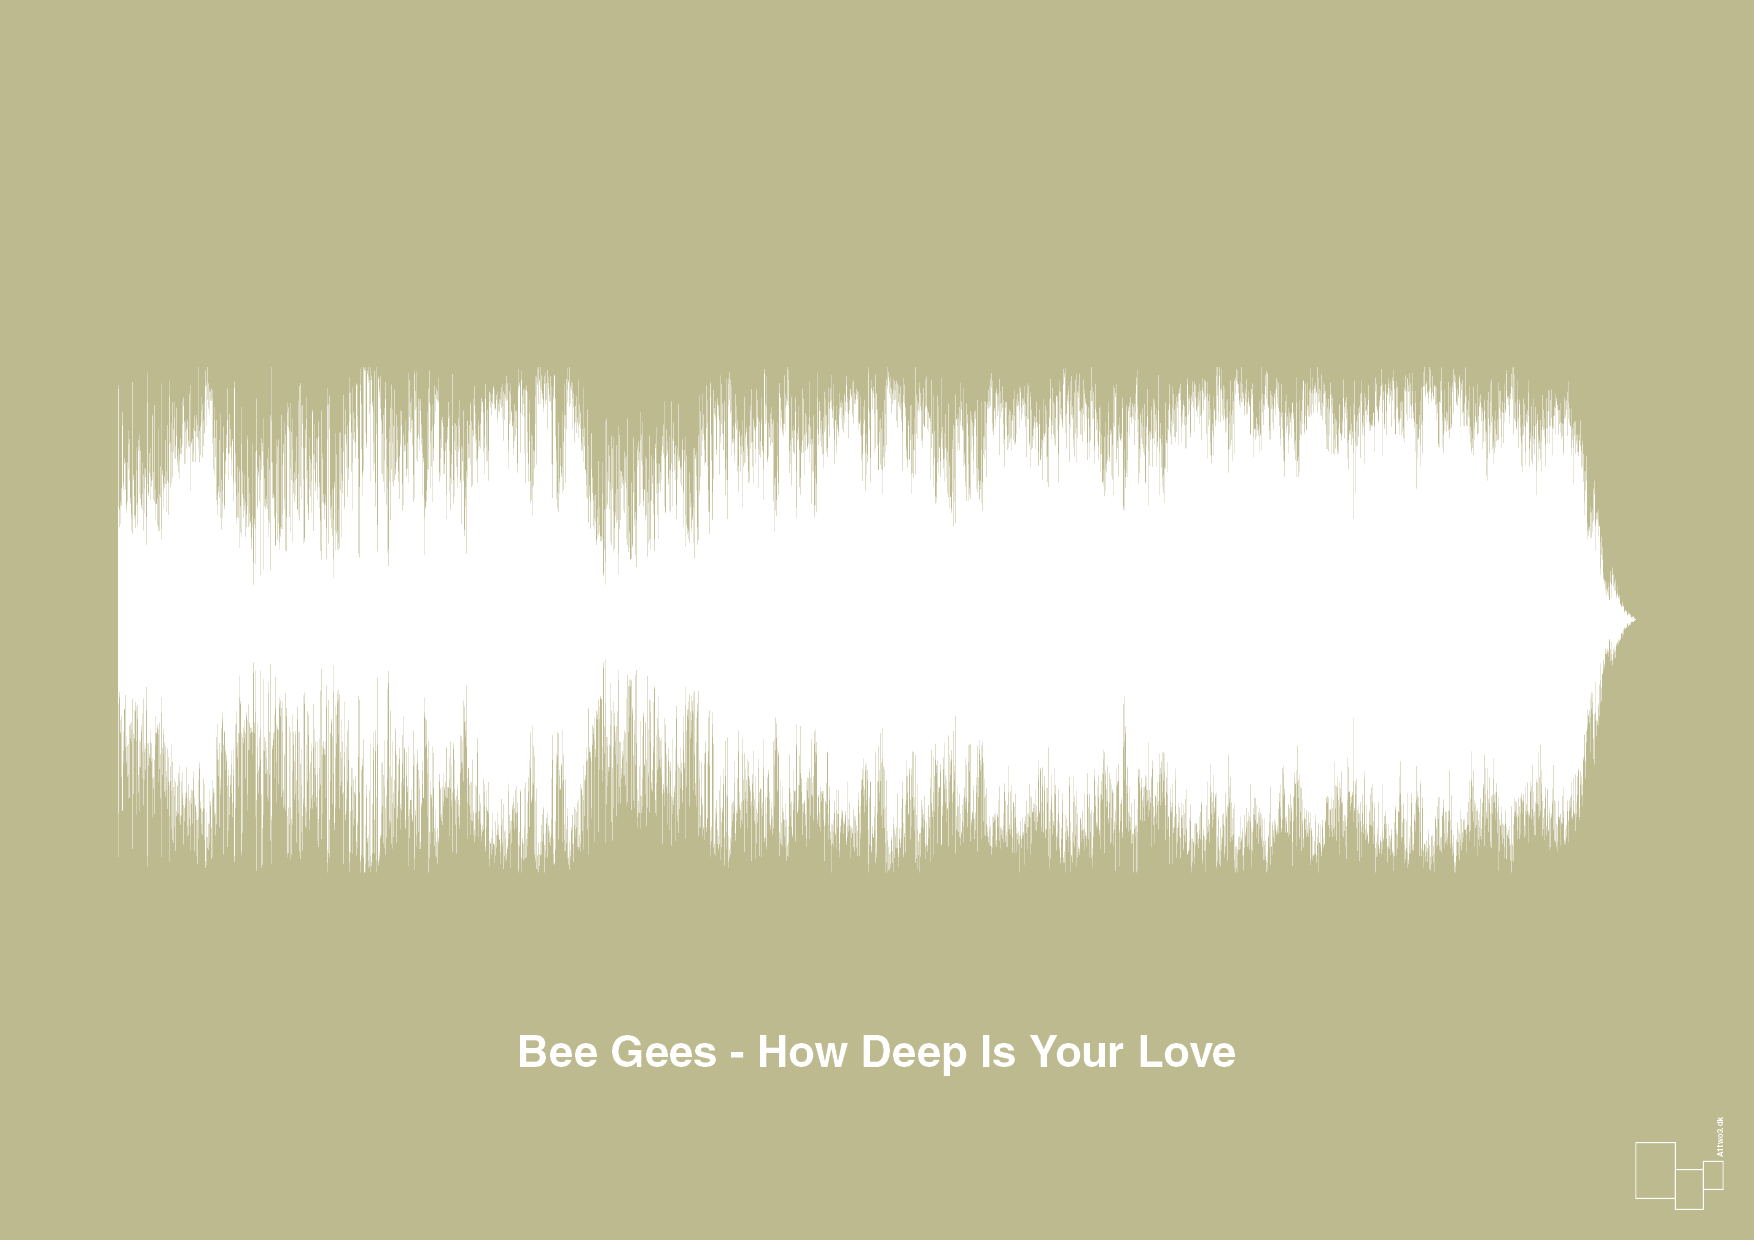 bee gees - how deep is your love - Plakat med Musik i Back to Nature